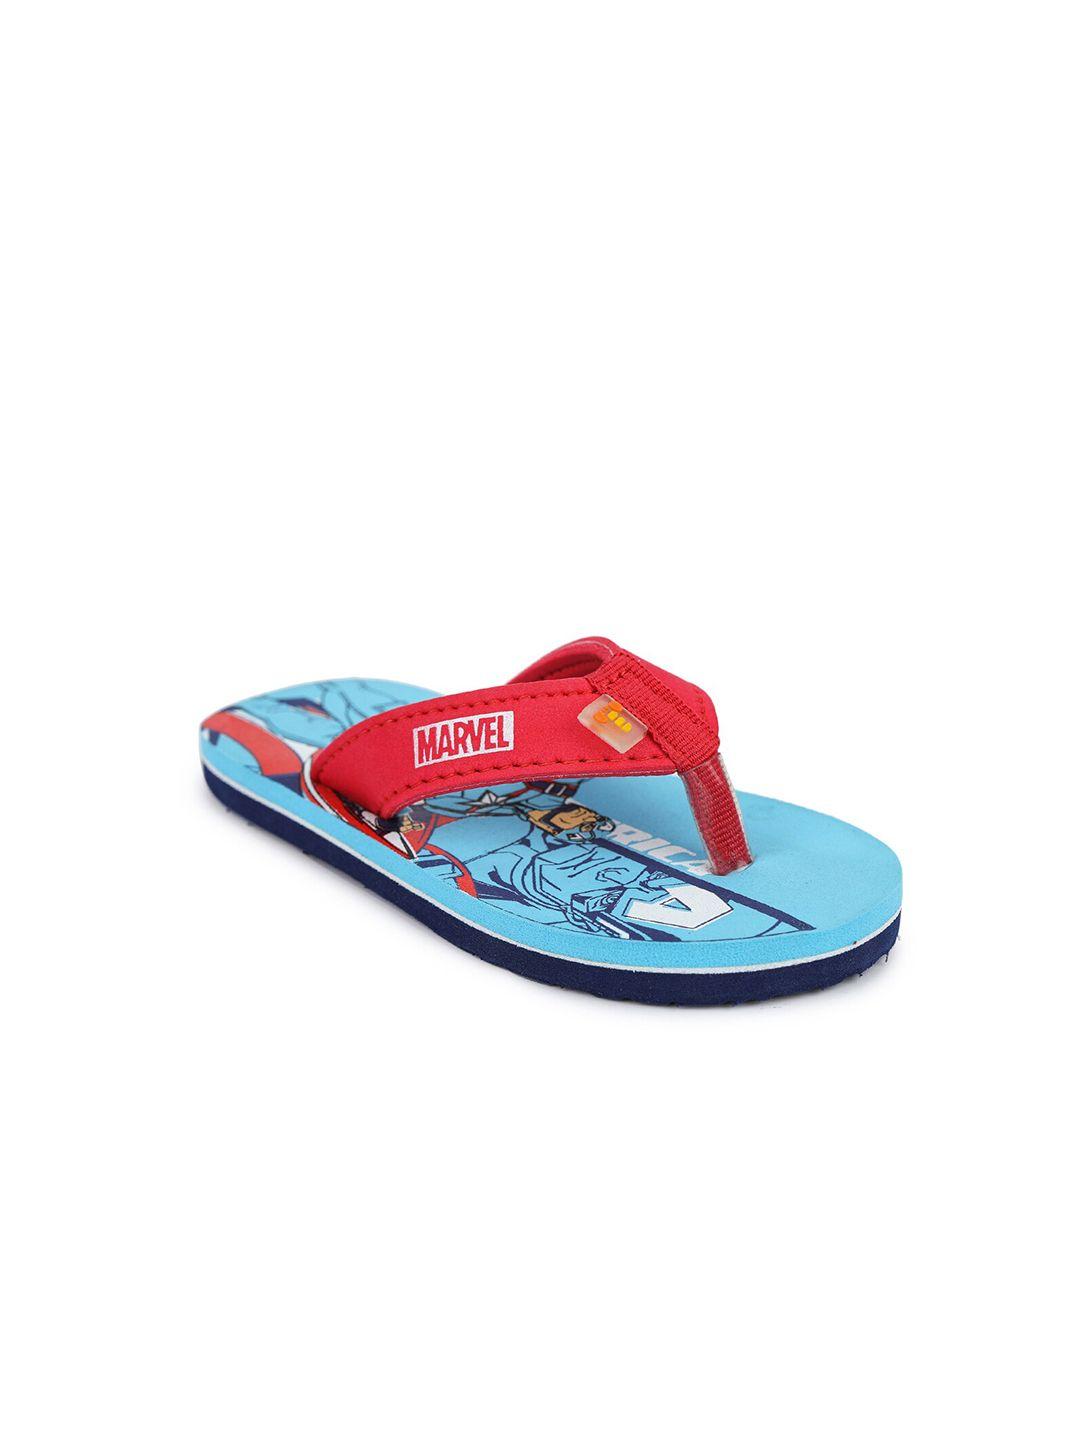 toothless-boys-blue-&-red-printed-rubber-thong-flip-flops